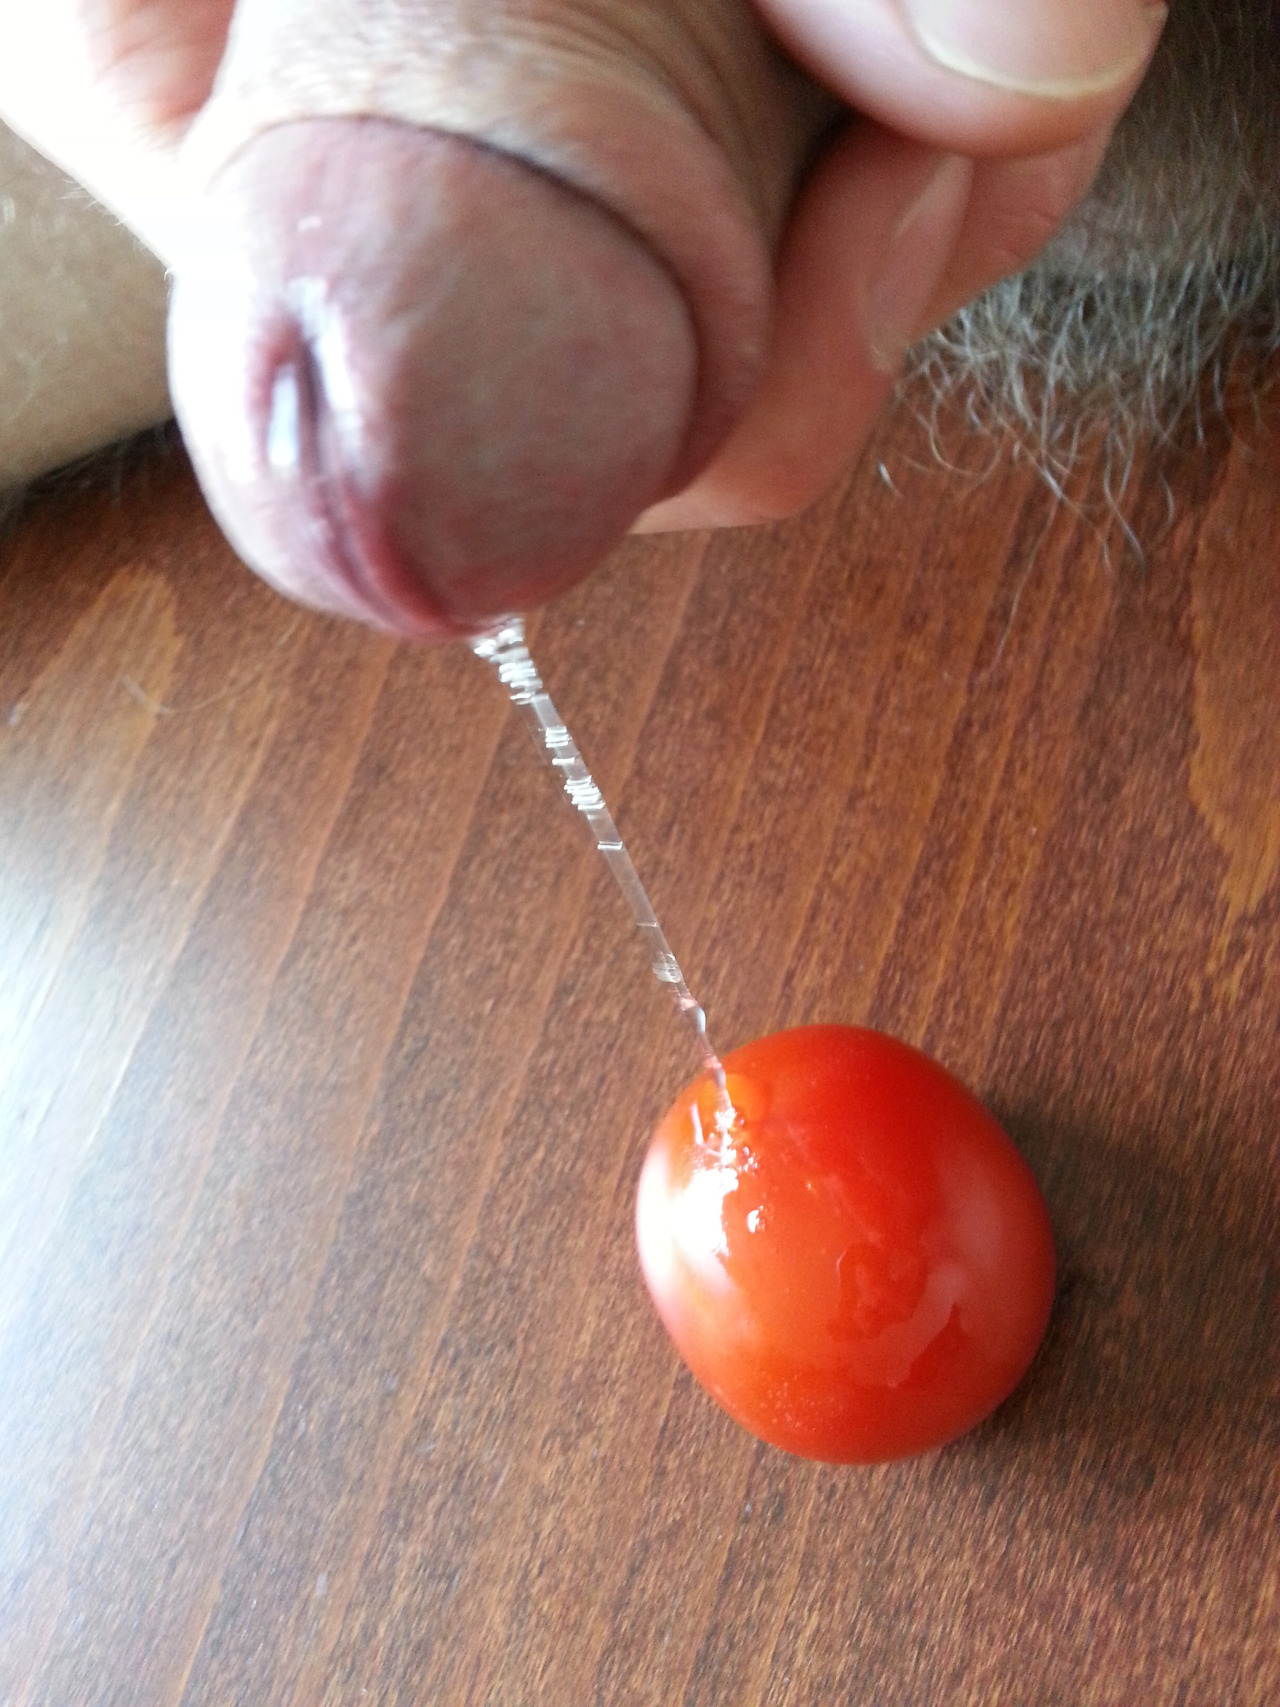 mydrippingcock:  Heavy precum makes a great salad dressing  I bet it does. I know